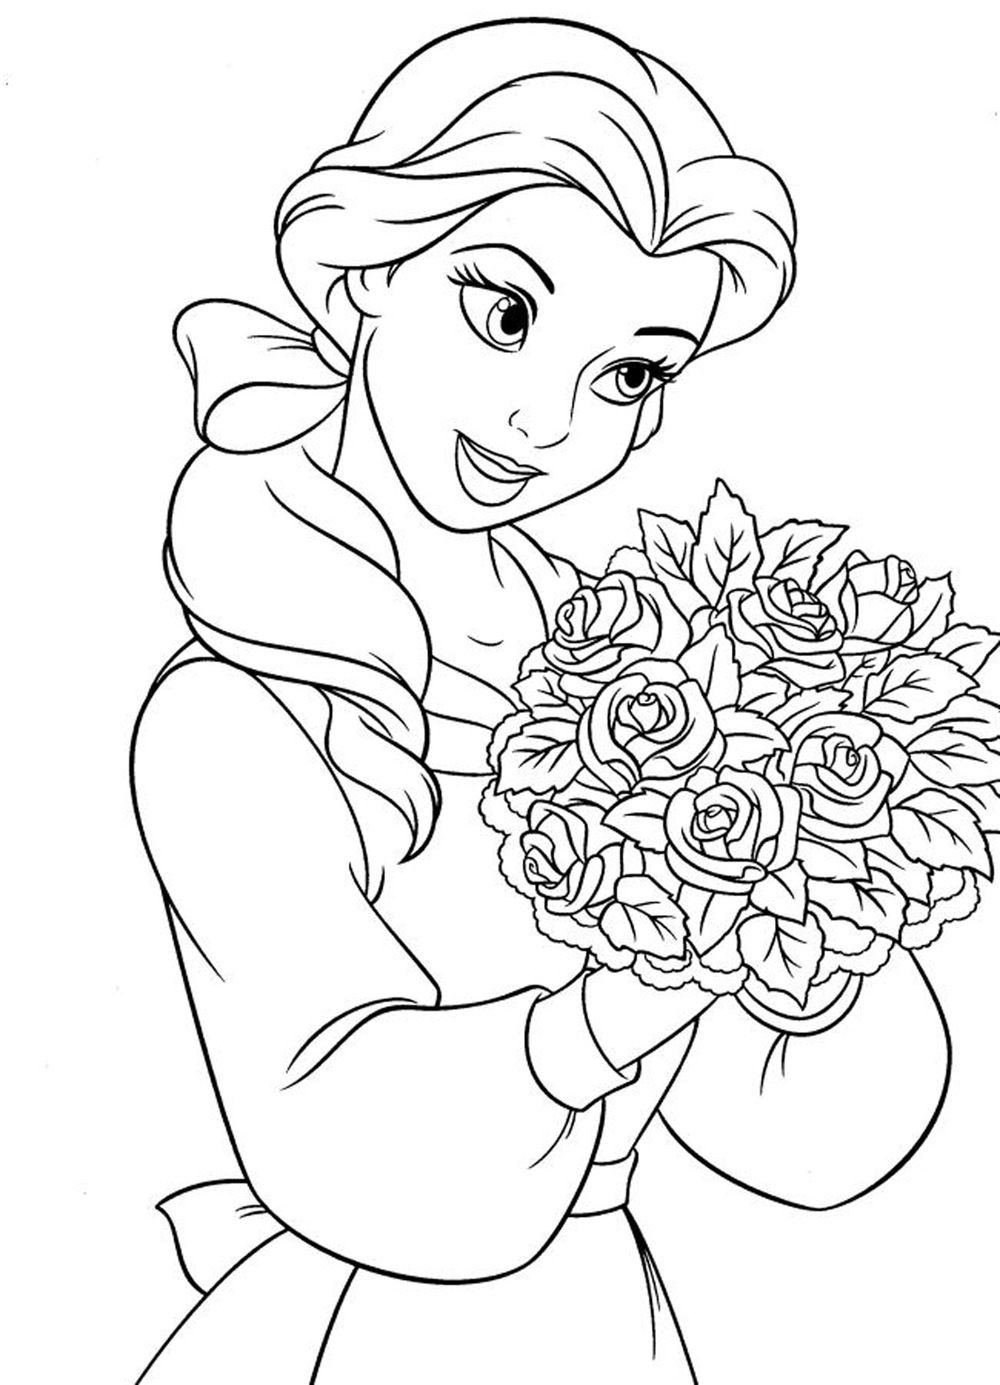 Free Coloring Pages For Girls
 princess coloring pages for girls Free